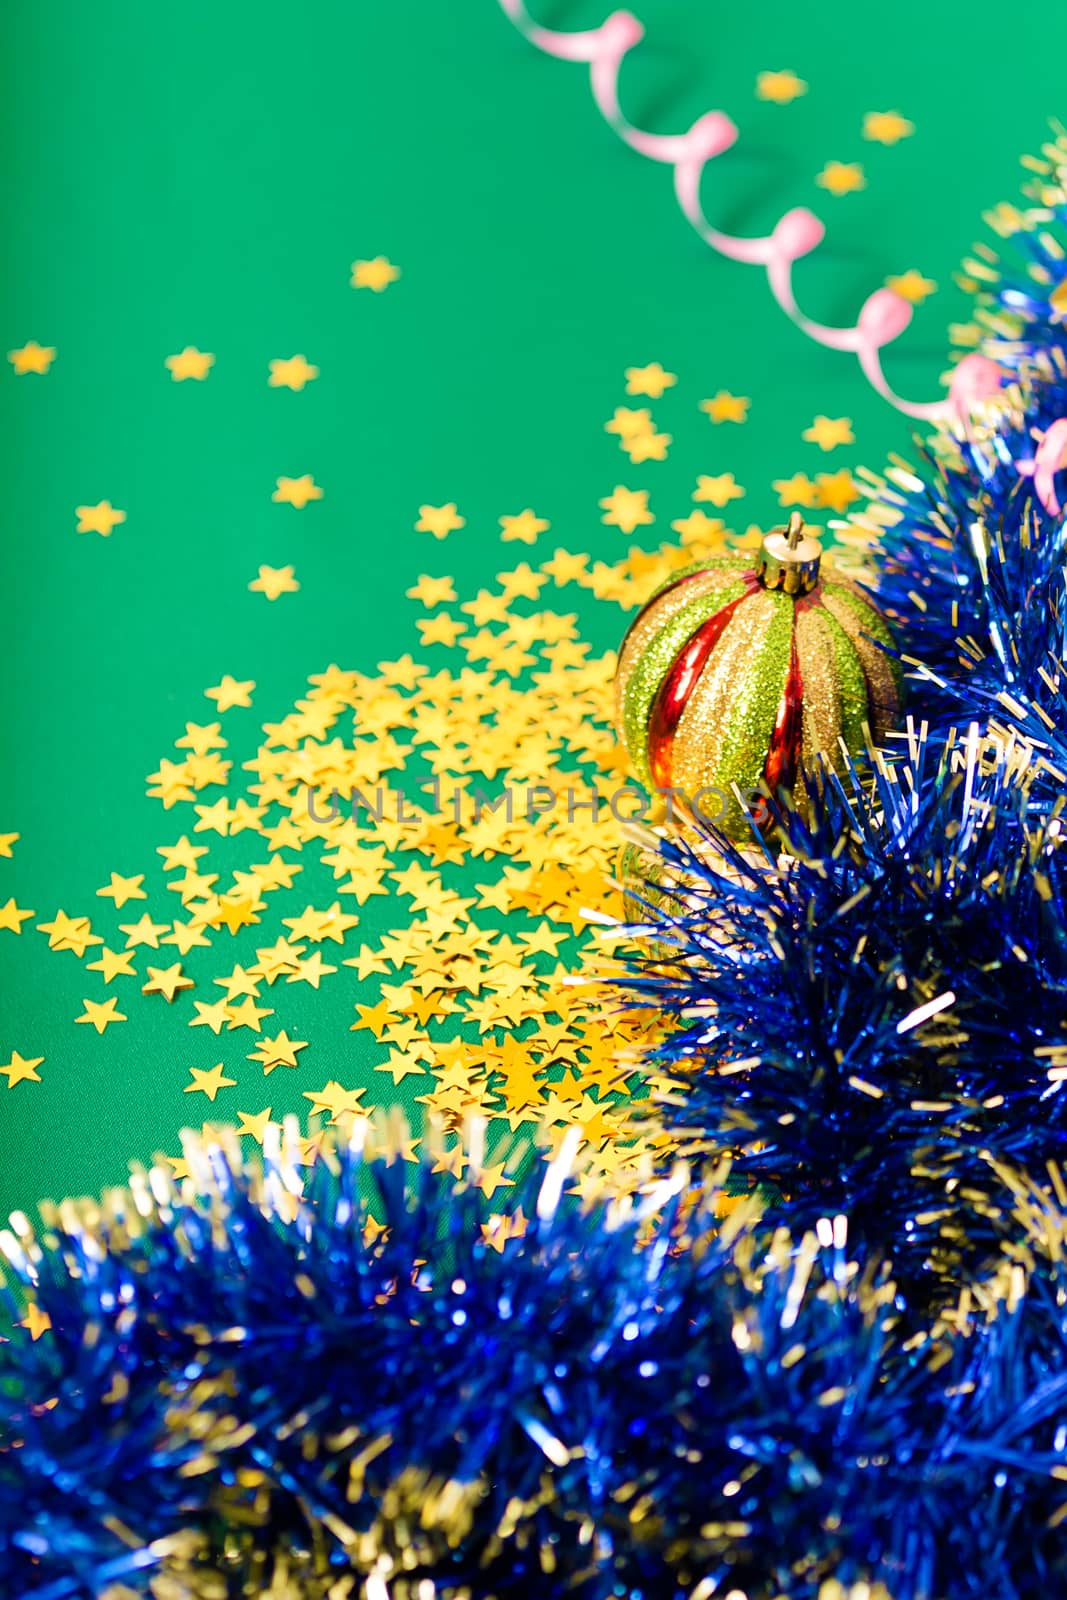 Christmas card. Stars and Christmas decorations on a green cloth